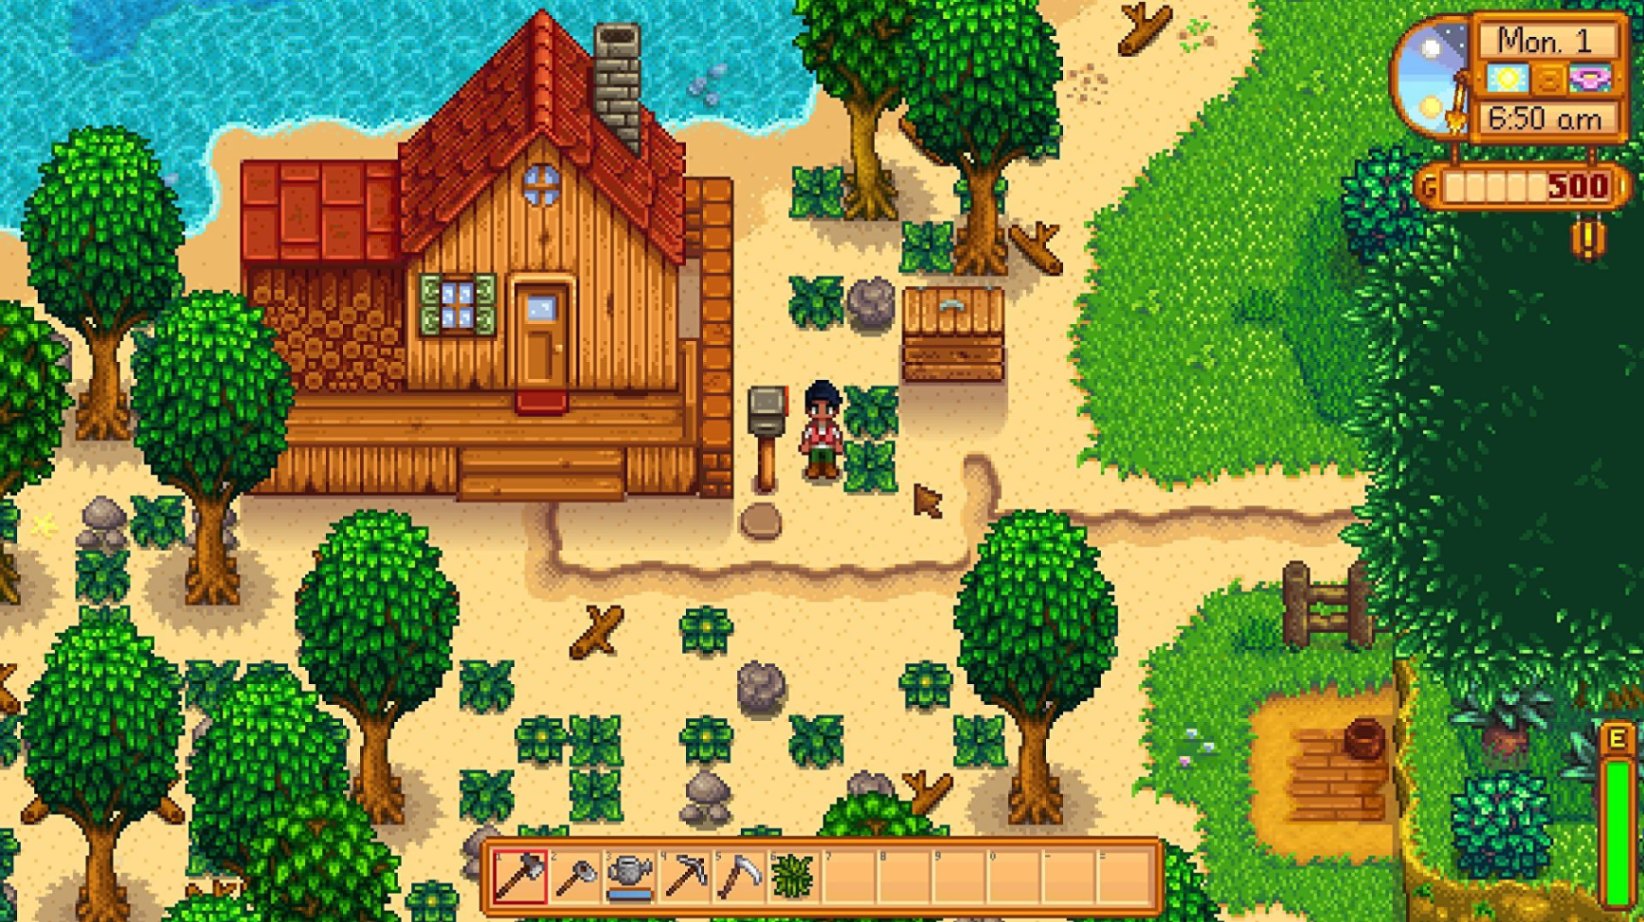 Stardew Valley Basics: How To Start Playing And Tips To Progress